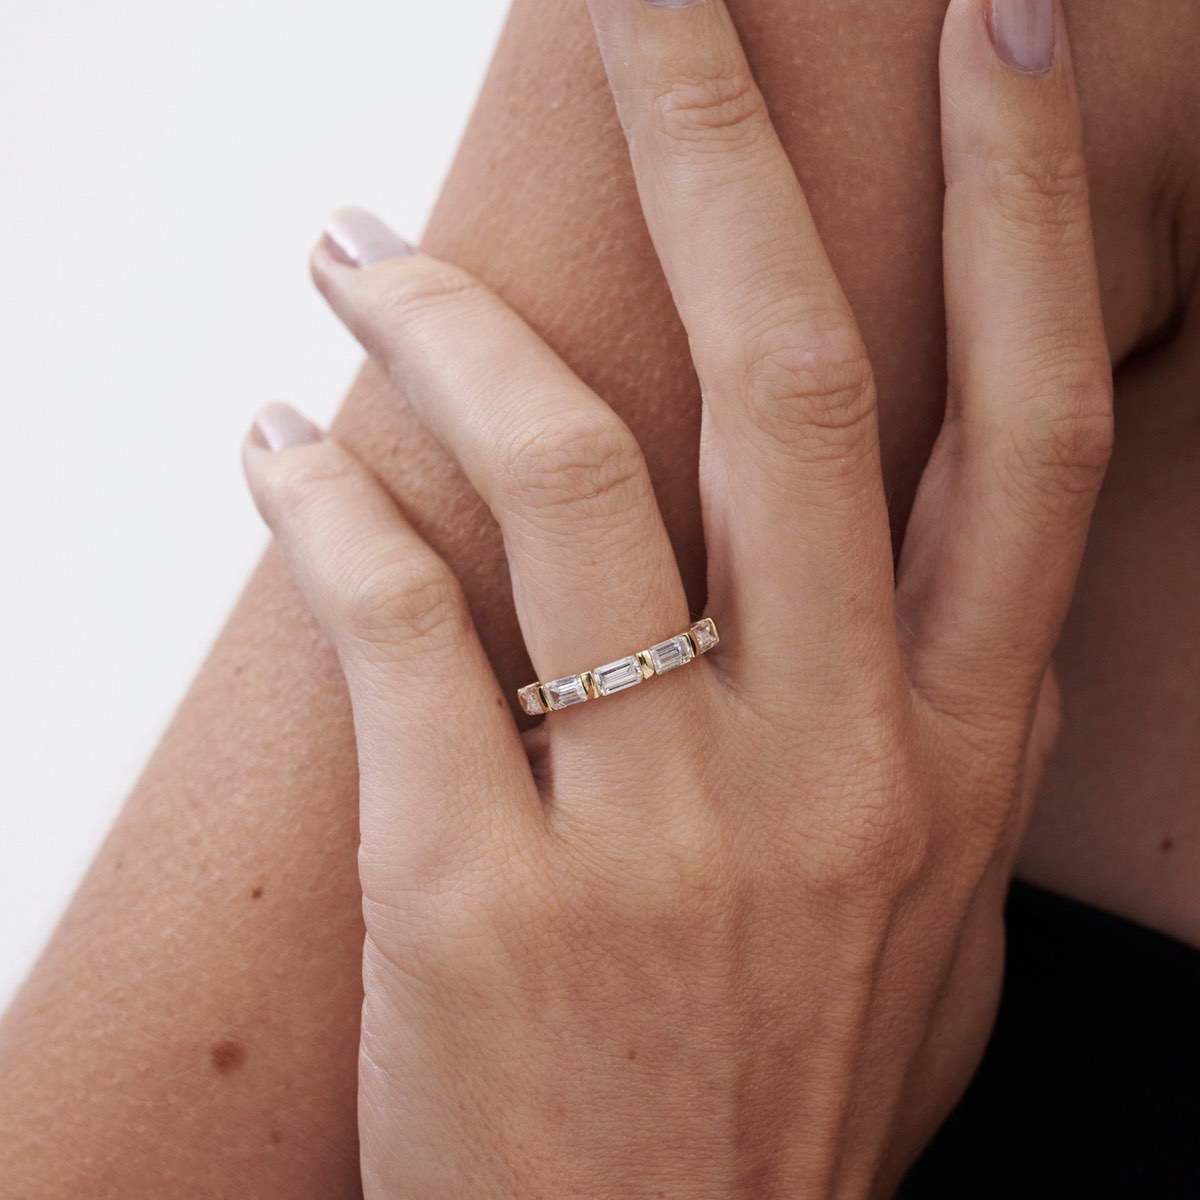 Celine is created with five emerald-cut lab-grown diamonds. The approximate total carat weight of this piece is 1.75ct. An elegant half-infinity row of five emerald cut lab-grown diamonds — secured seamlessly by solid gold bar settings.